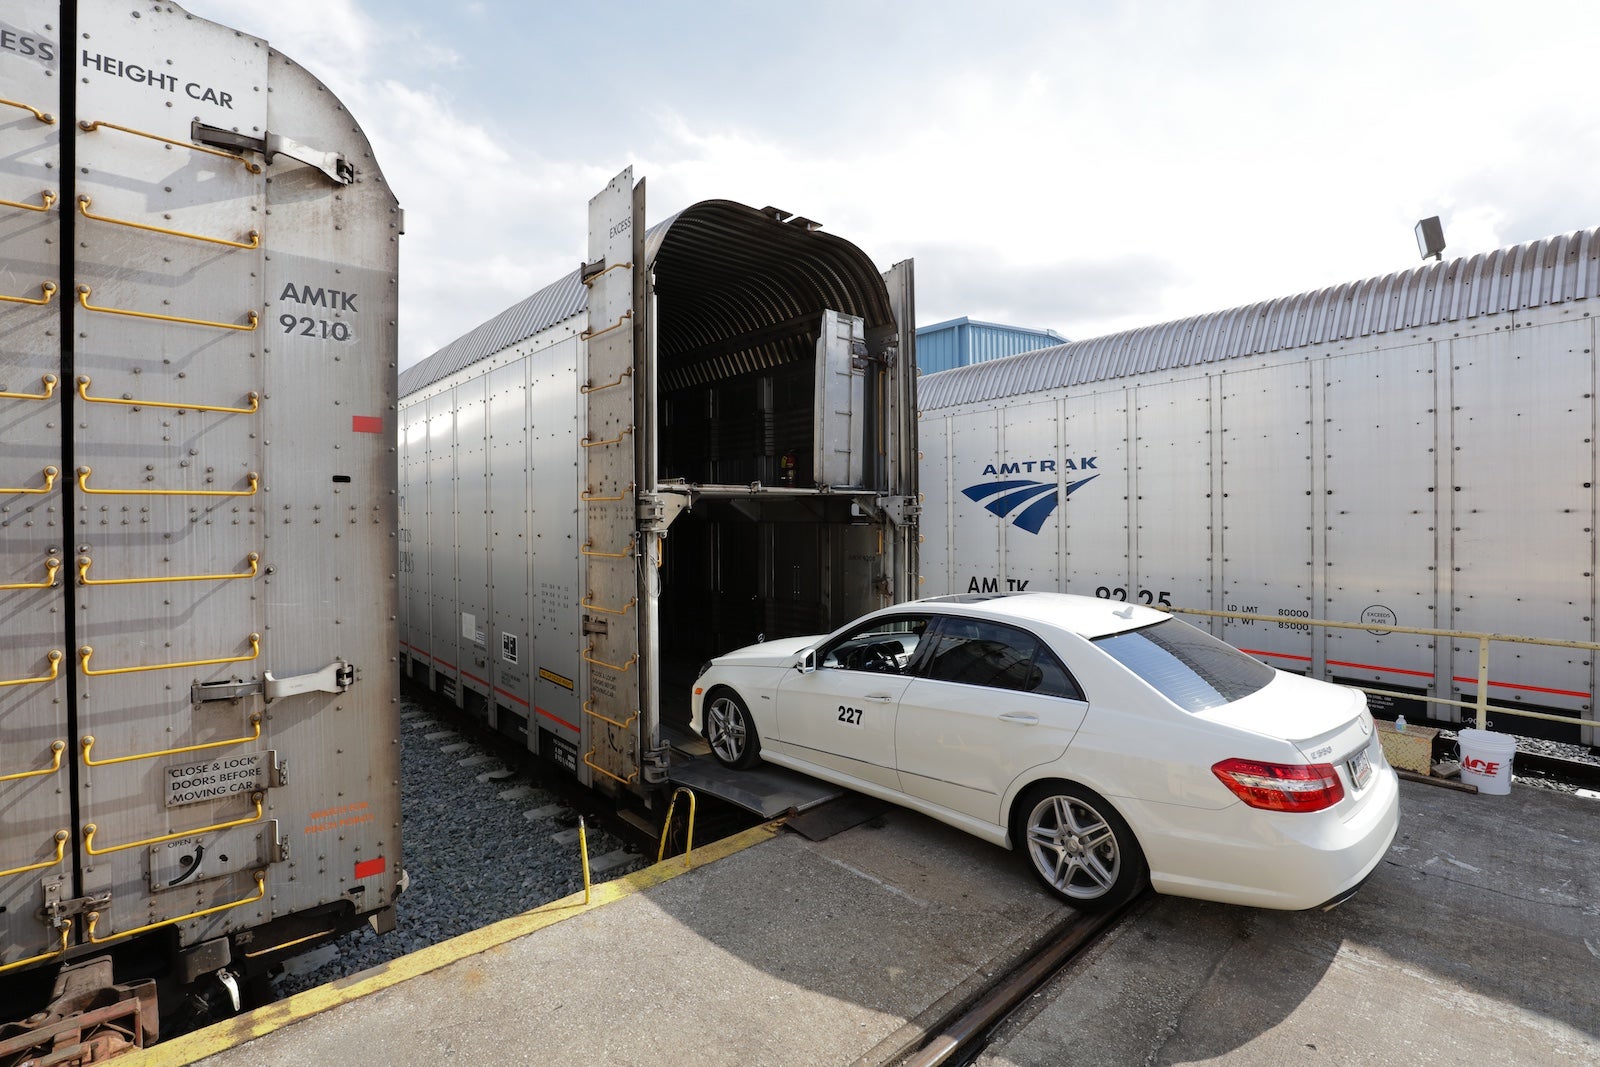 You are currently viewing Amtrak Auto Train tickets starting at $75 for travel this summer